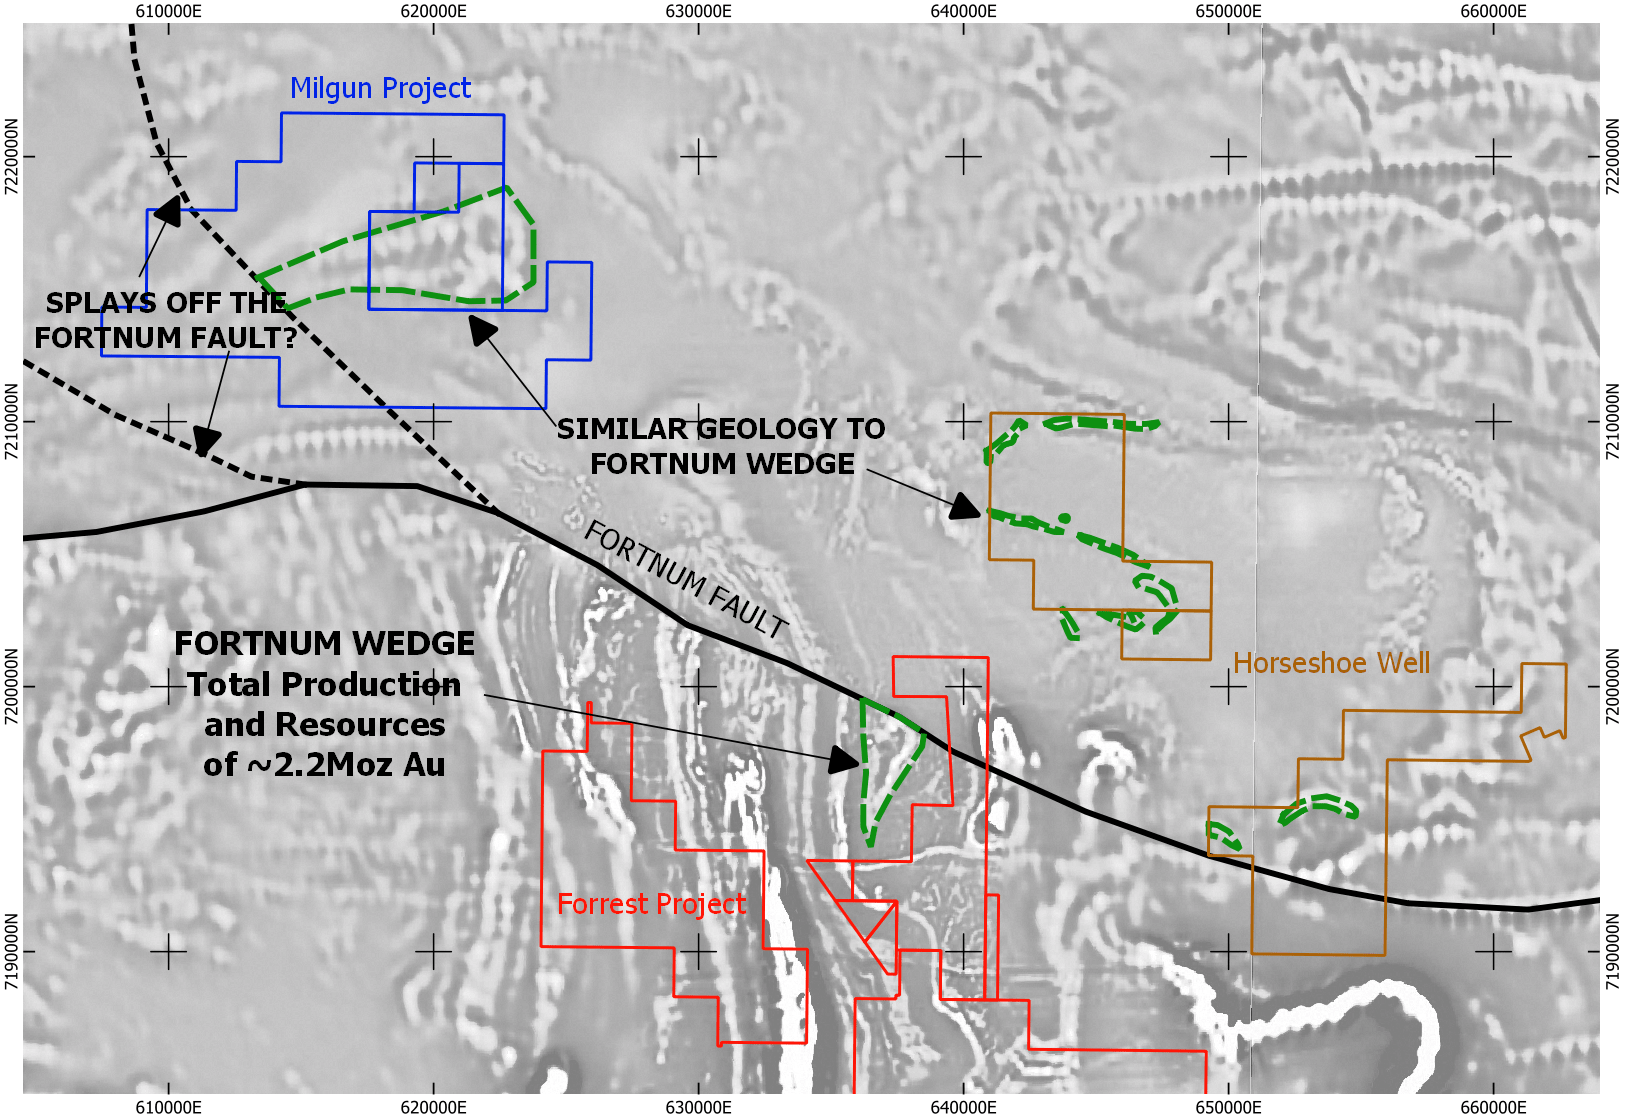 Location of Milgun and Horseshoe Well Projects (underlying Aeromagnetic image)